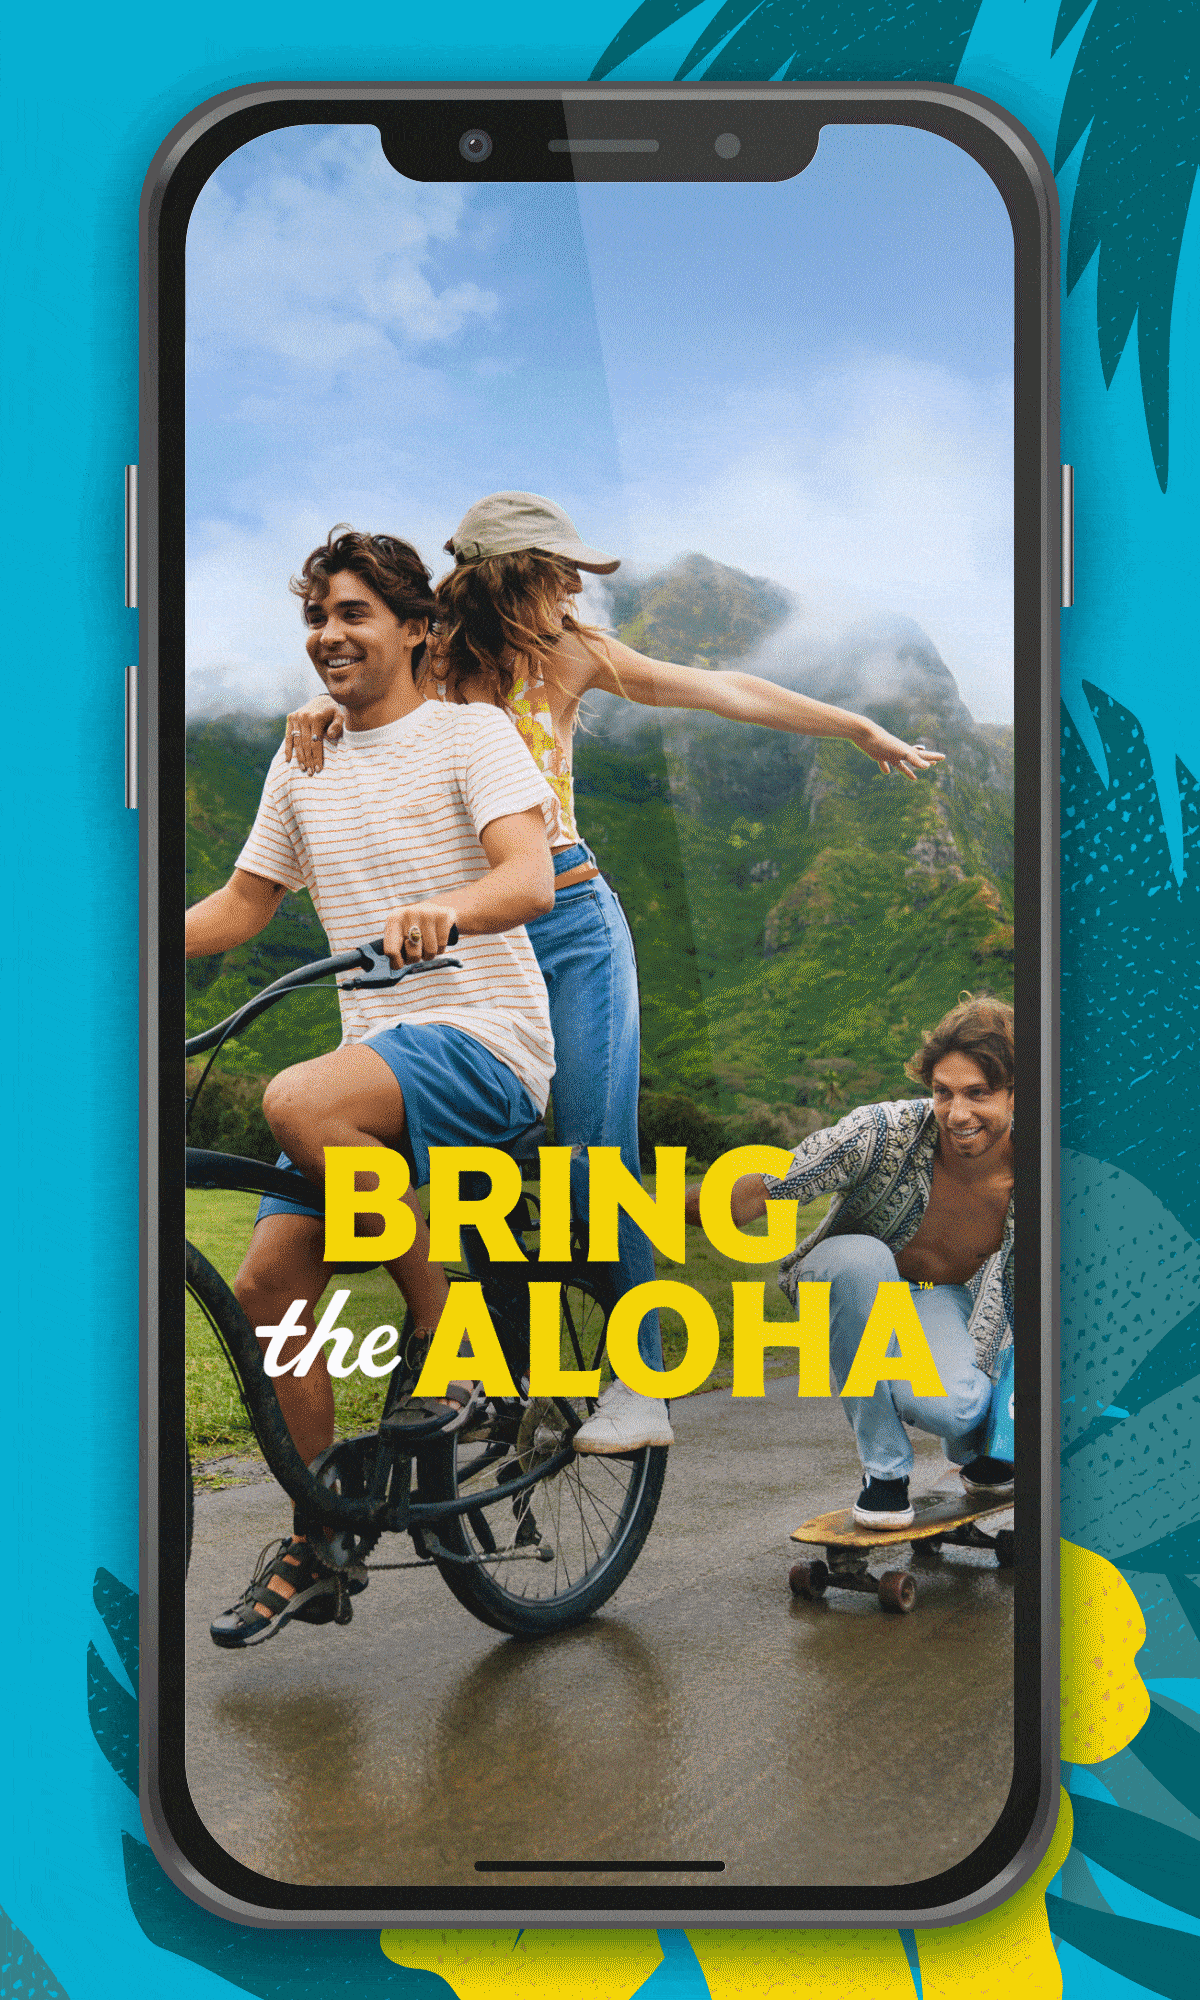 A series of GIFs showing the campaign photography on a mobile phone screen with the tagline, “Bring the Aloha.”